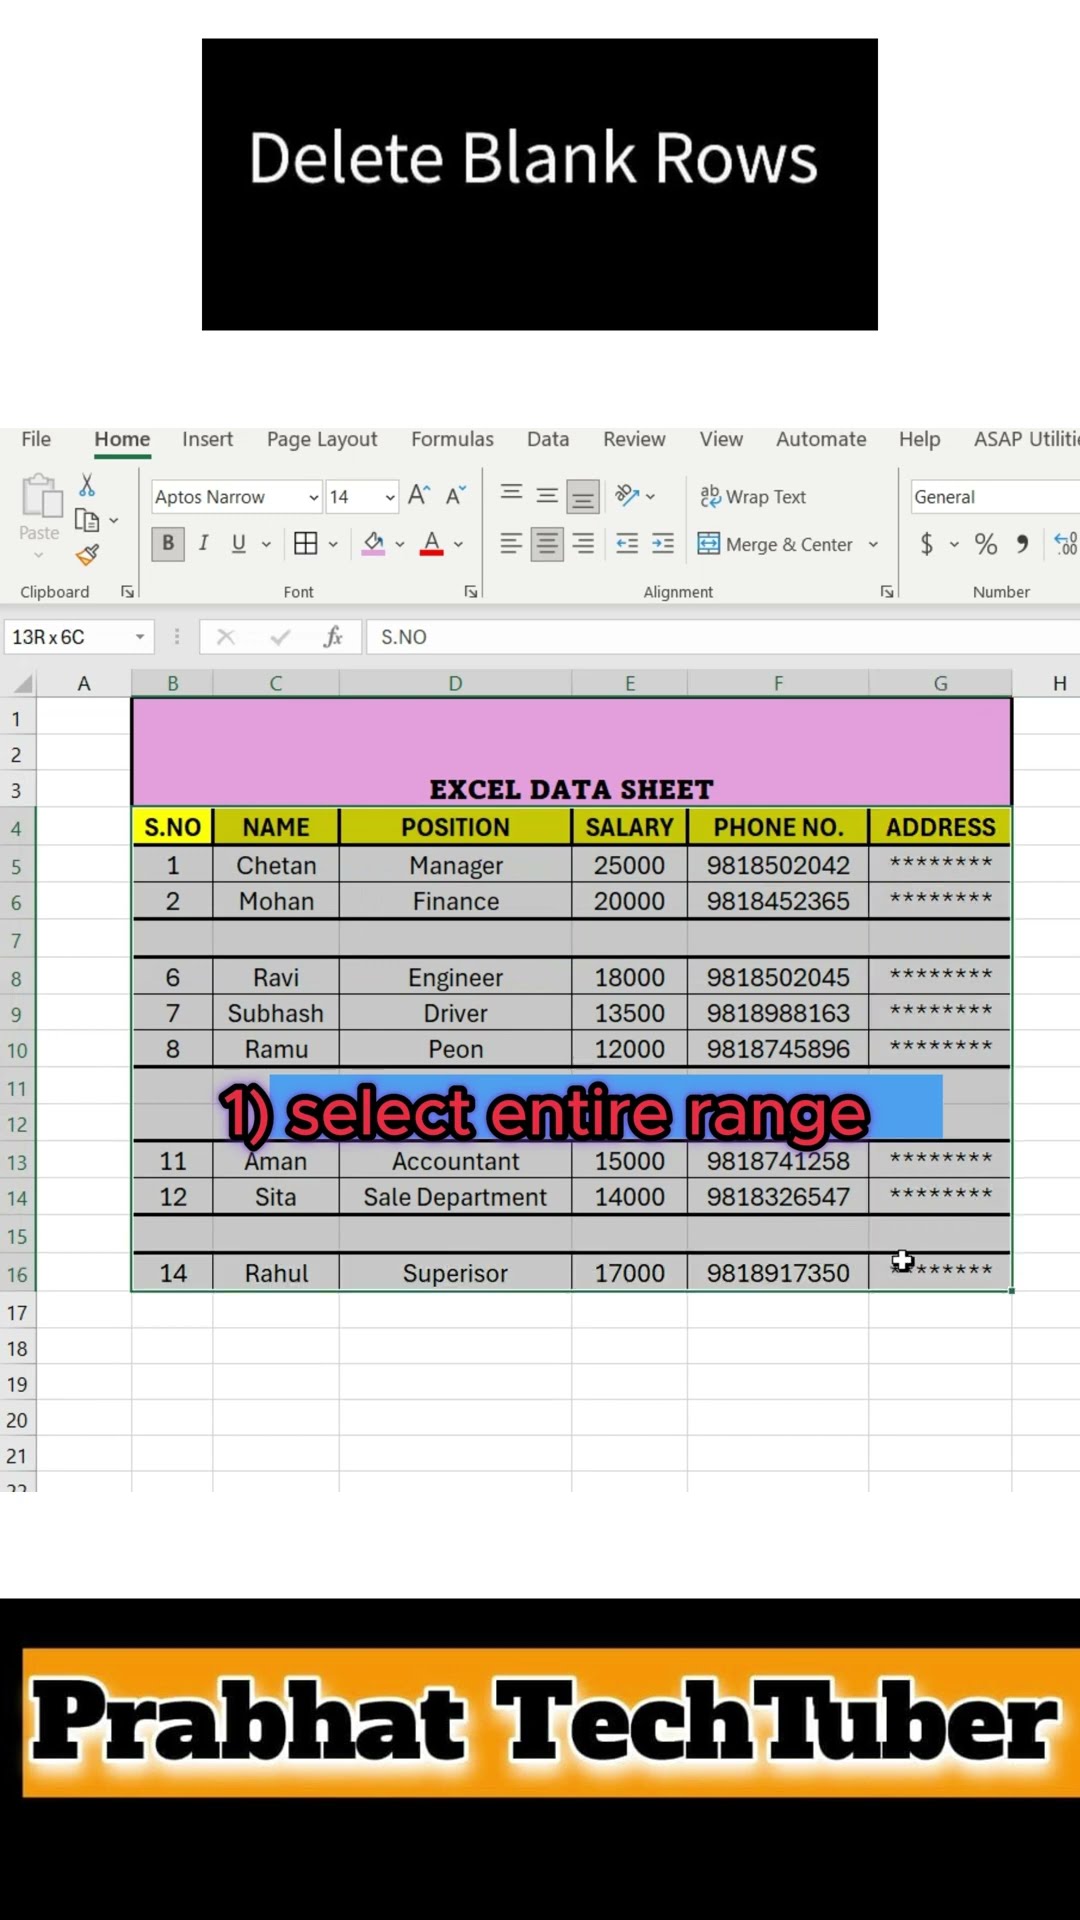 How to Delete Blank Rows in excel Delete empty rows with excel shortcuts #shorts